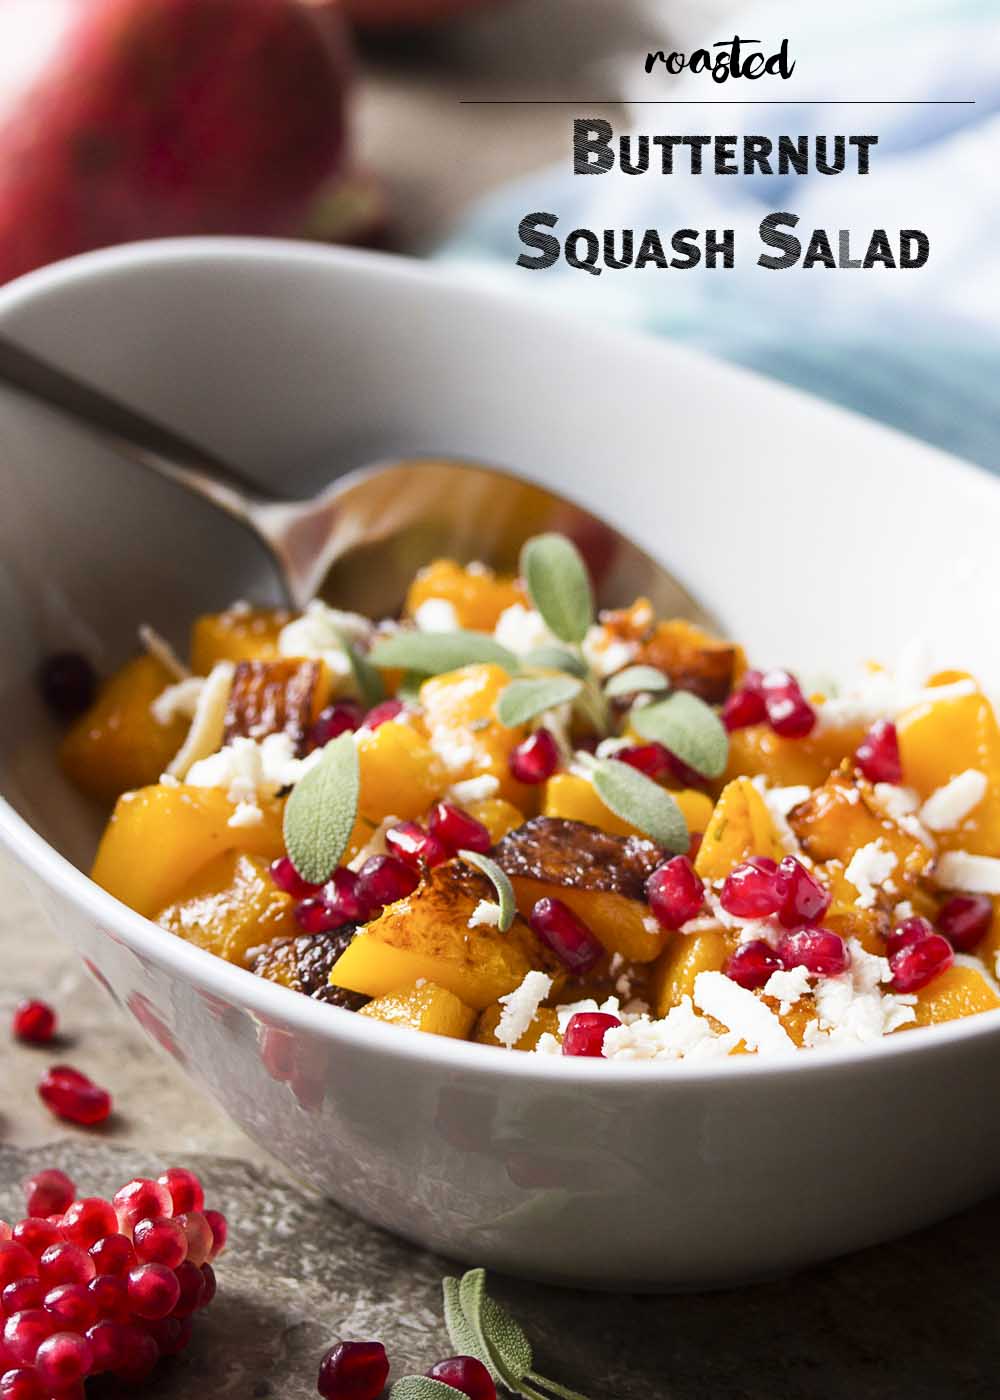 Winter squash, ricotta salata, and pomegranate seeds combine to make a warm roasted butternut squash salad which is perfect for fall. Great for the Thanksgiving and holiday table! Healthy. Gluten-Free. | justalittlebitofbacon.com